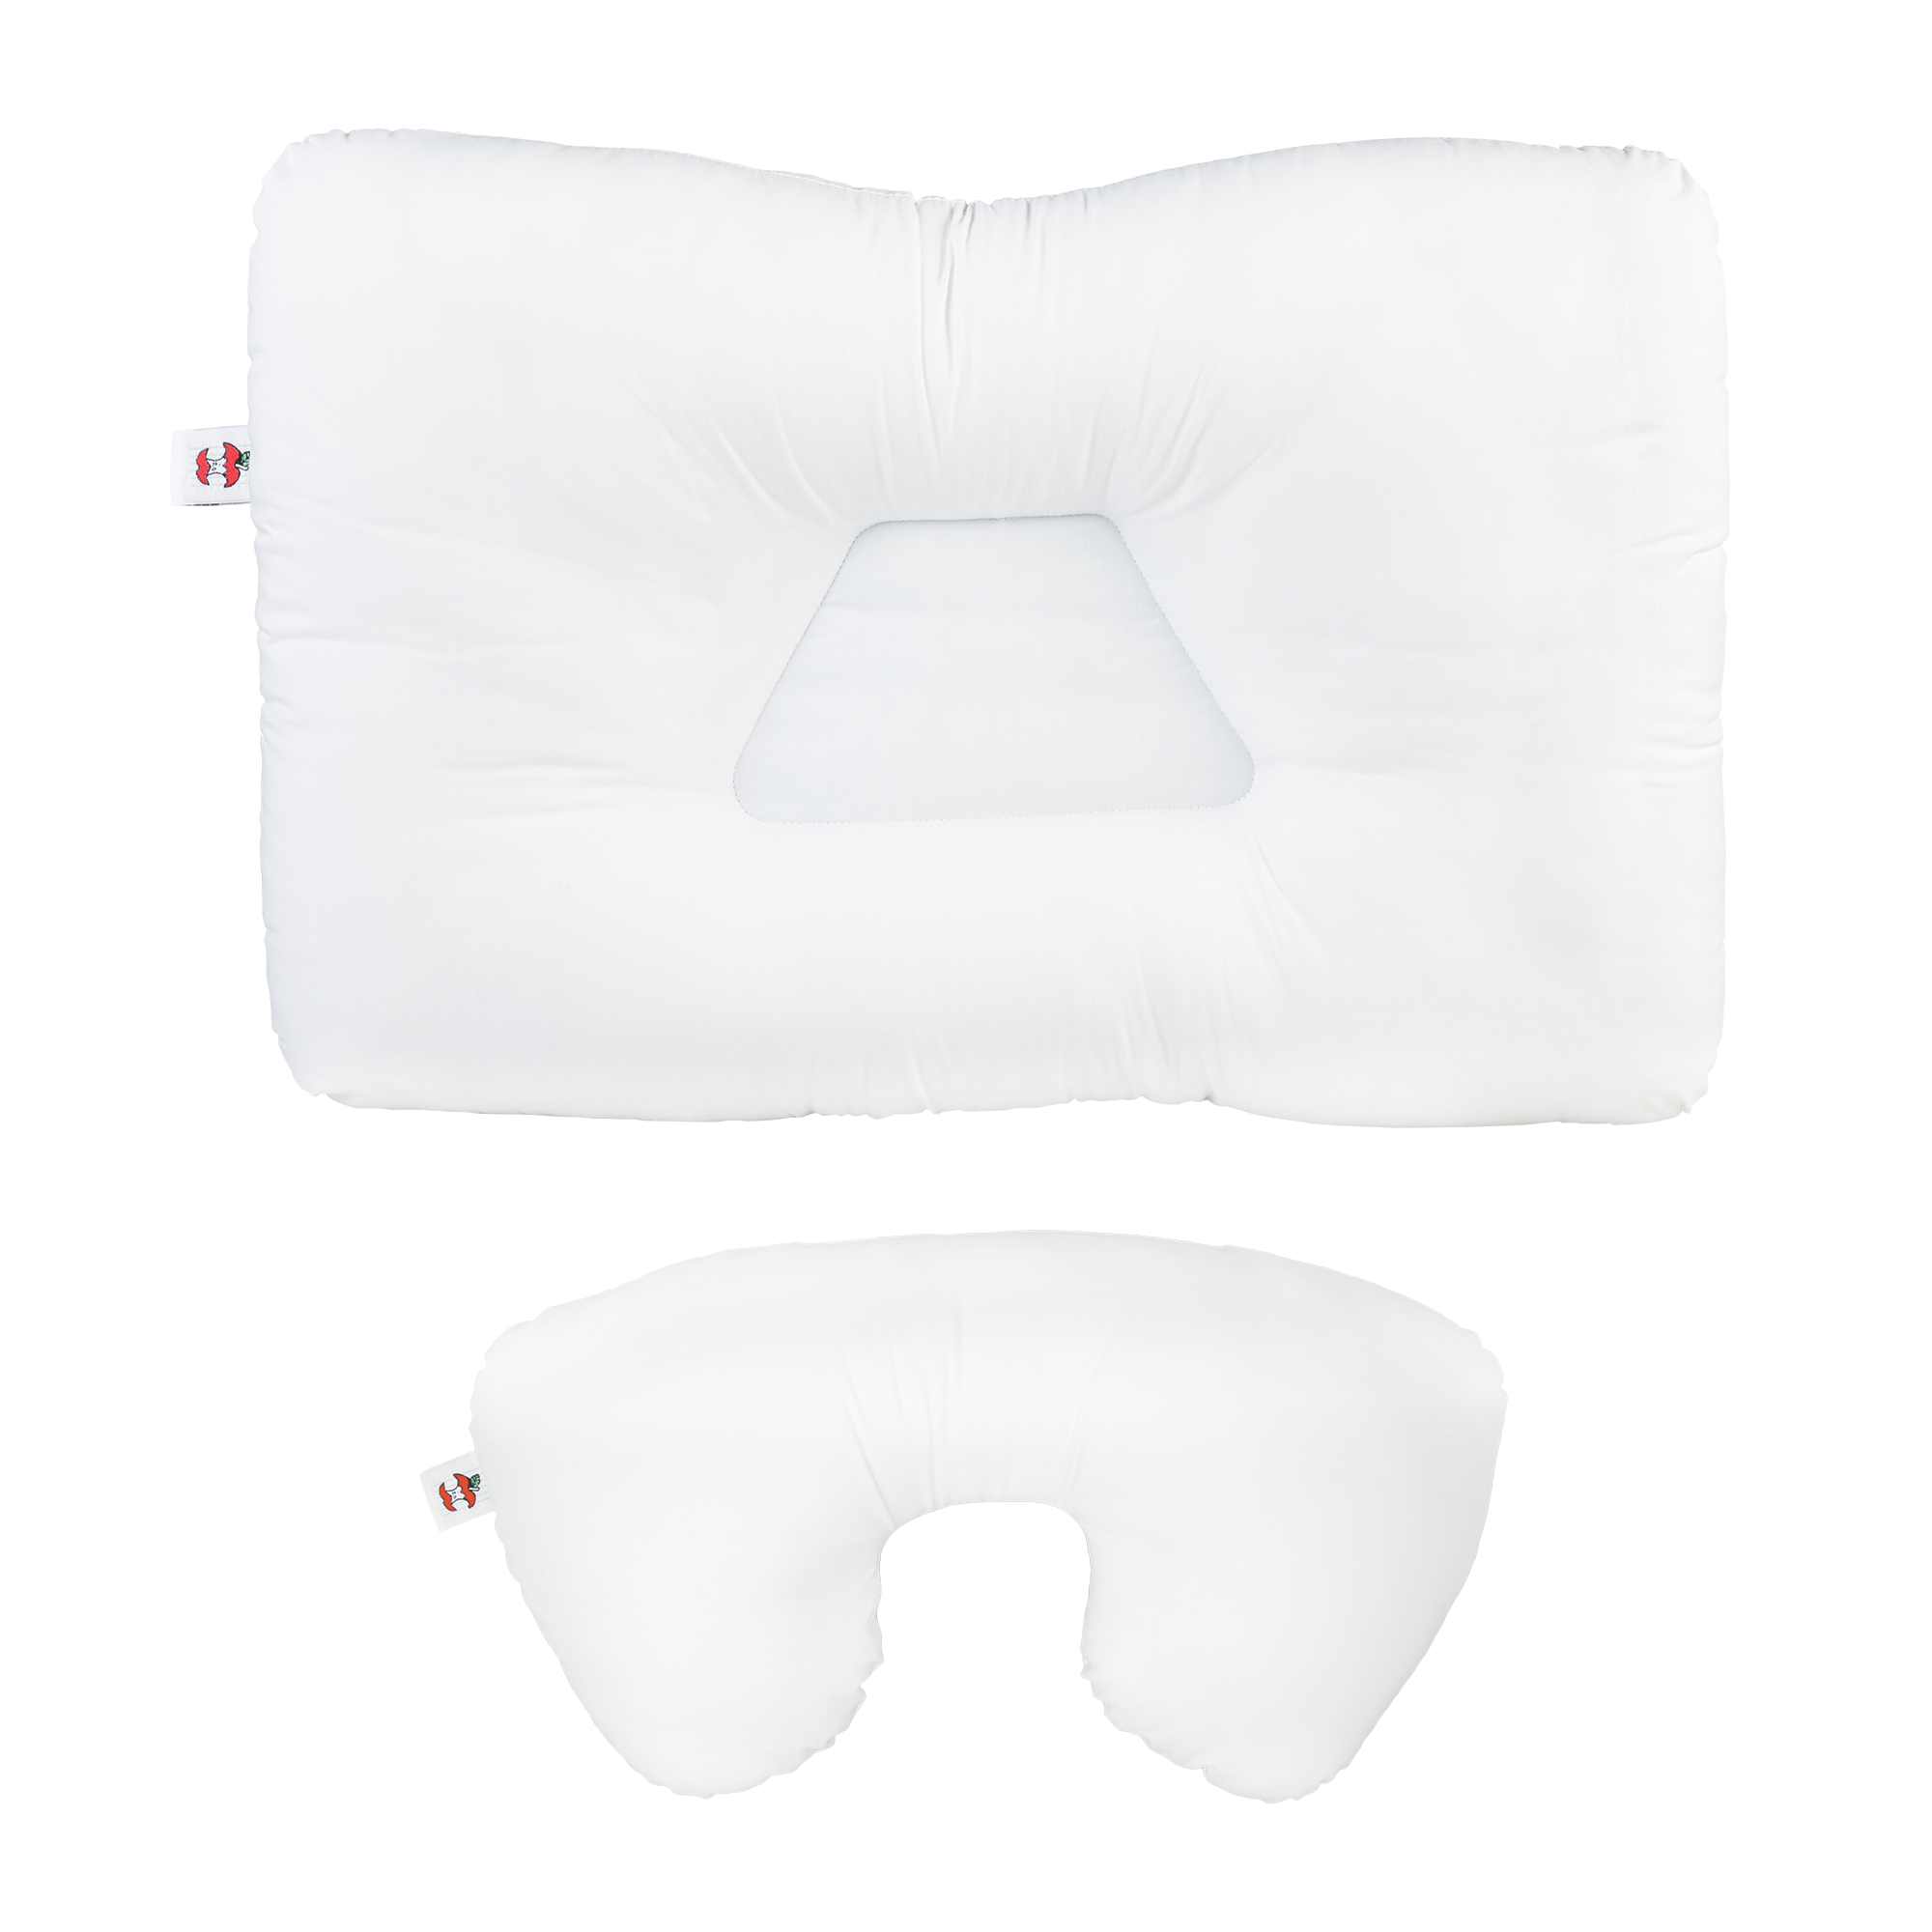 Tri-Core Cervical Support Pillow, Mid-size, Firm & Travel Core Combo